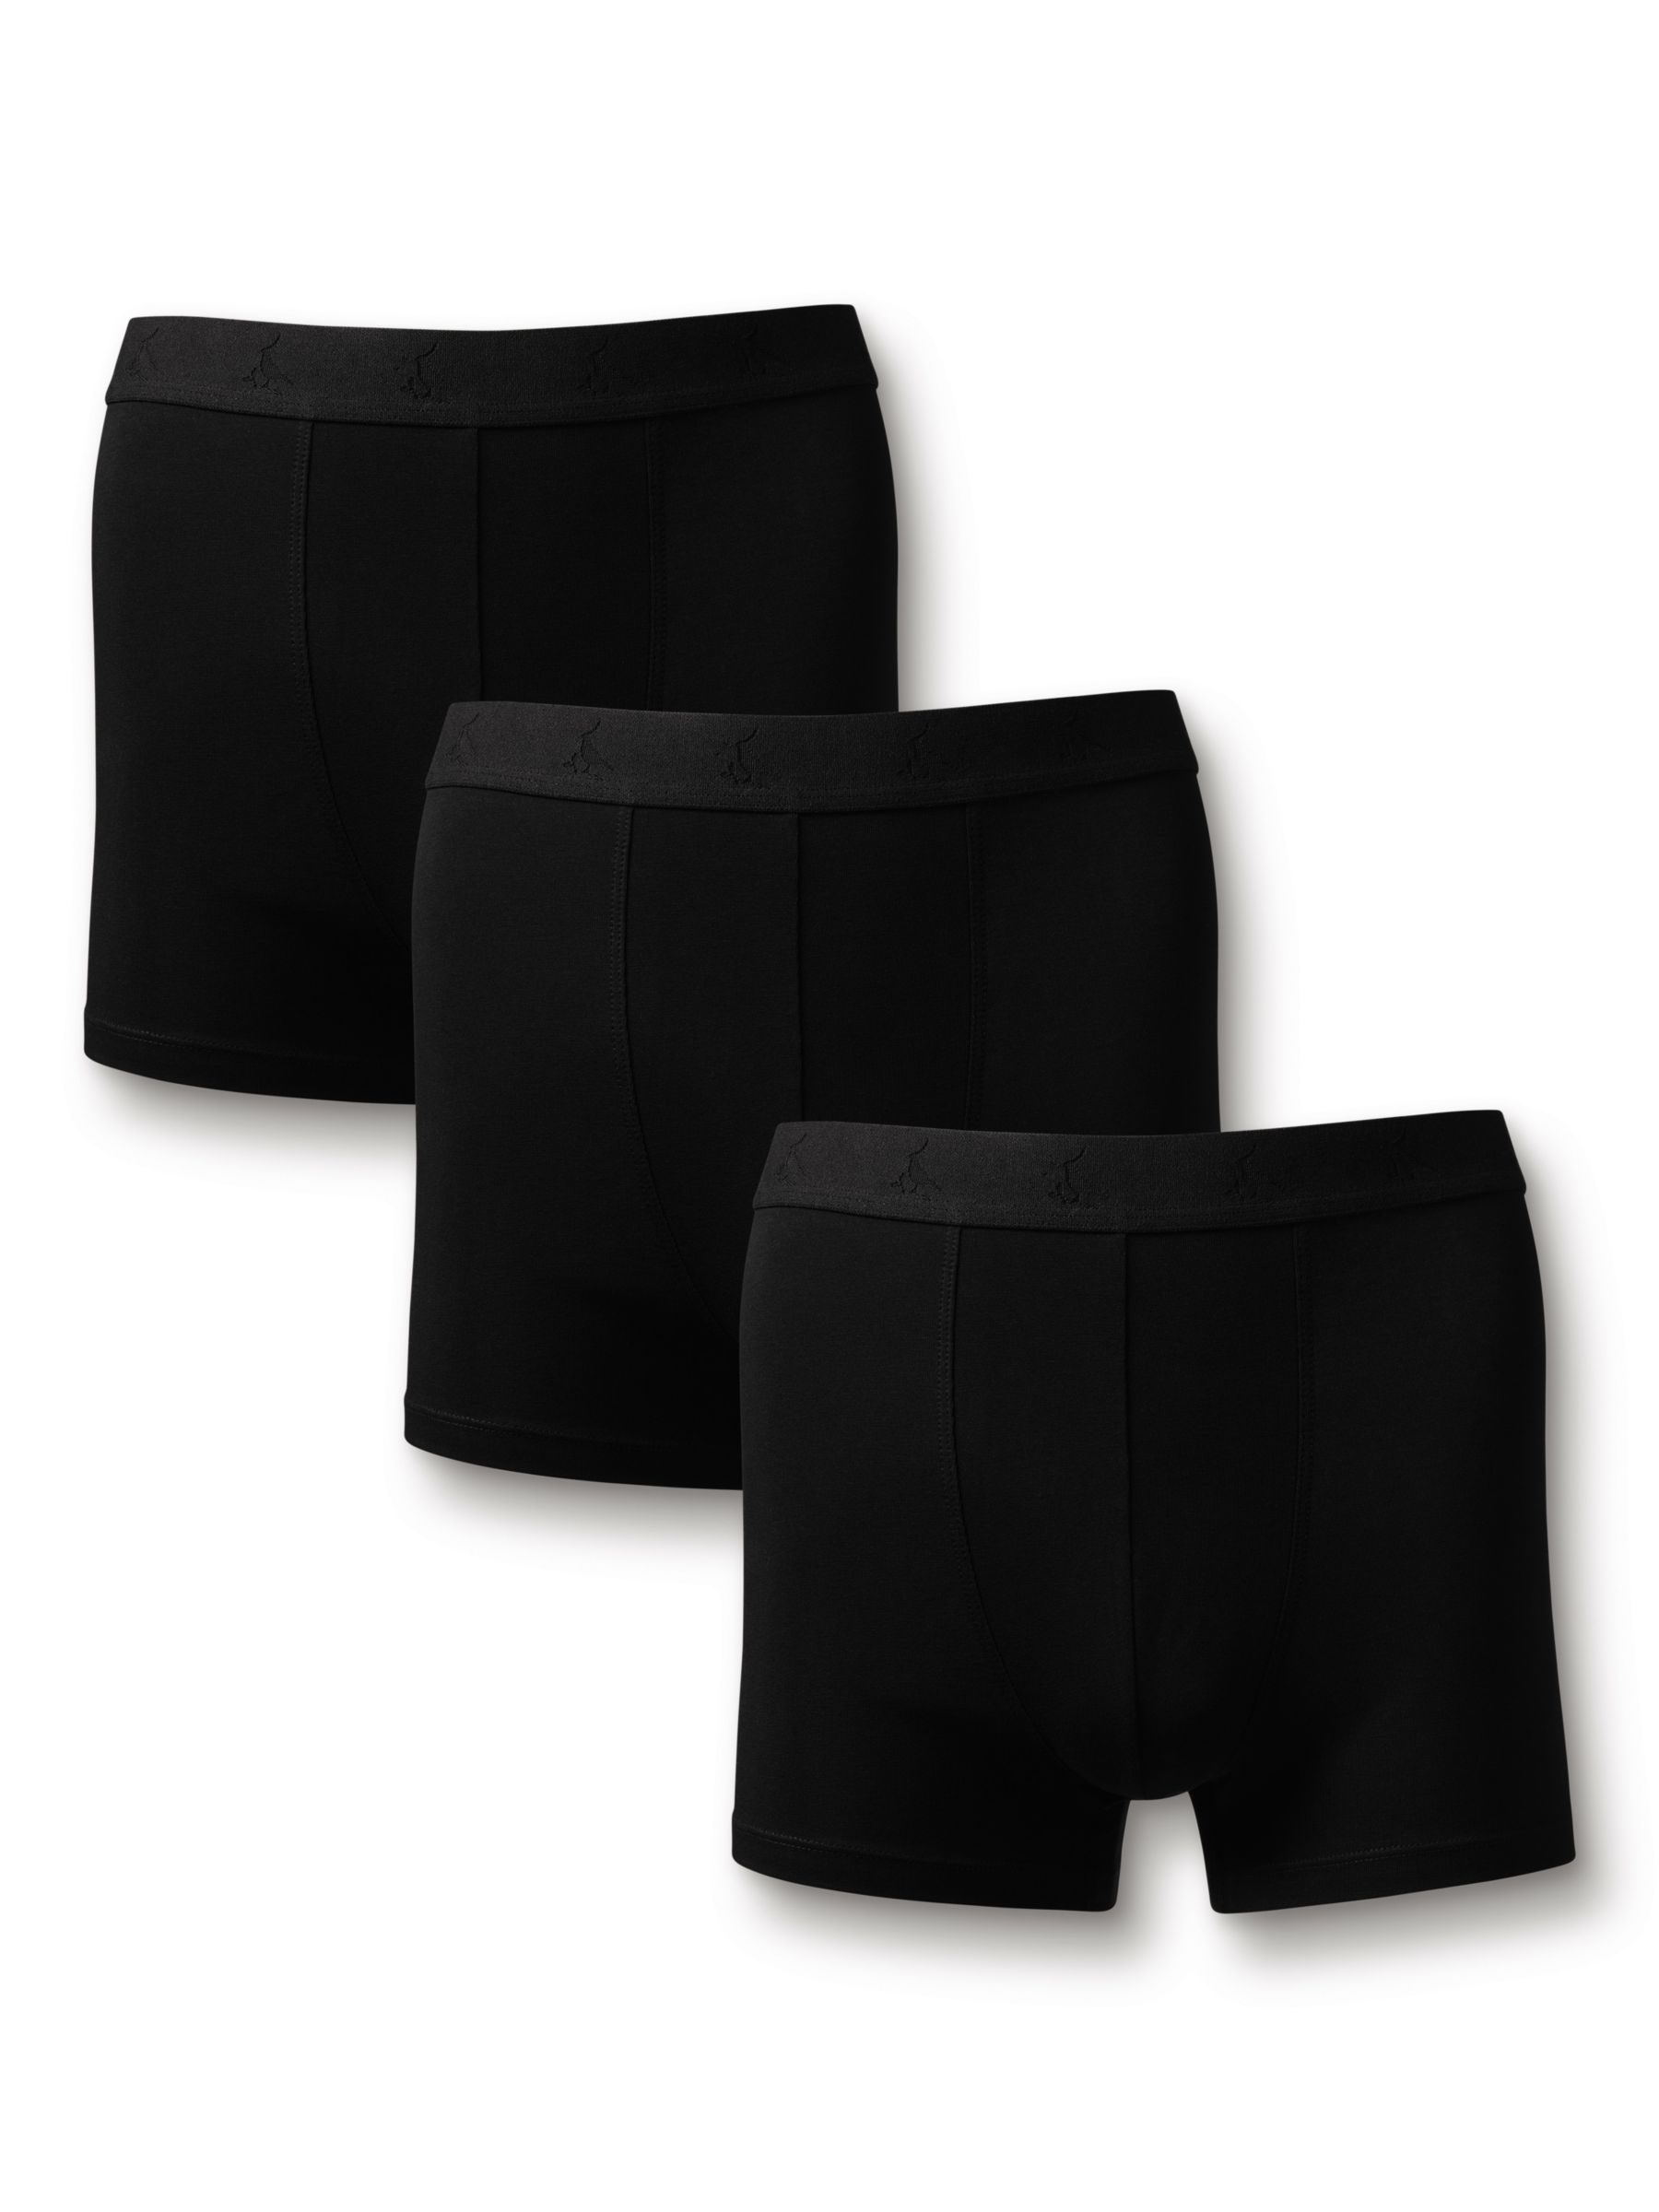 Modibodi Classic Full Brief Moderate to Heavy Absorbency Knickers